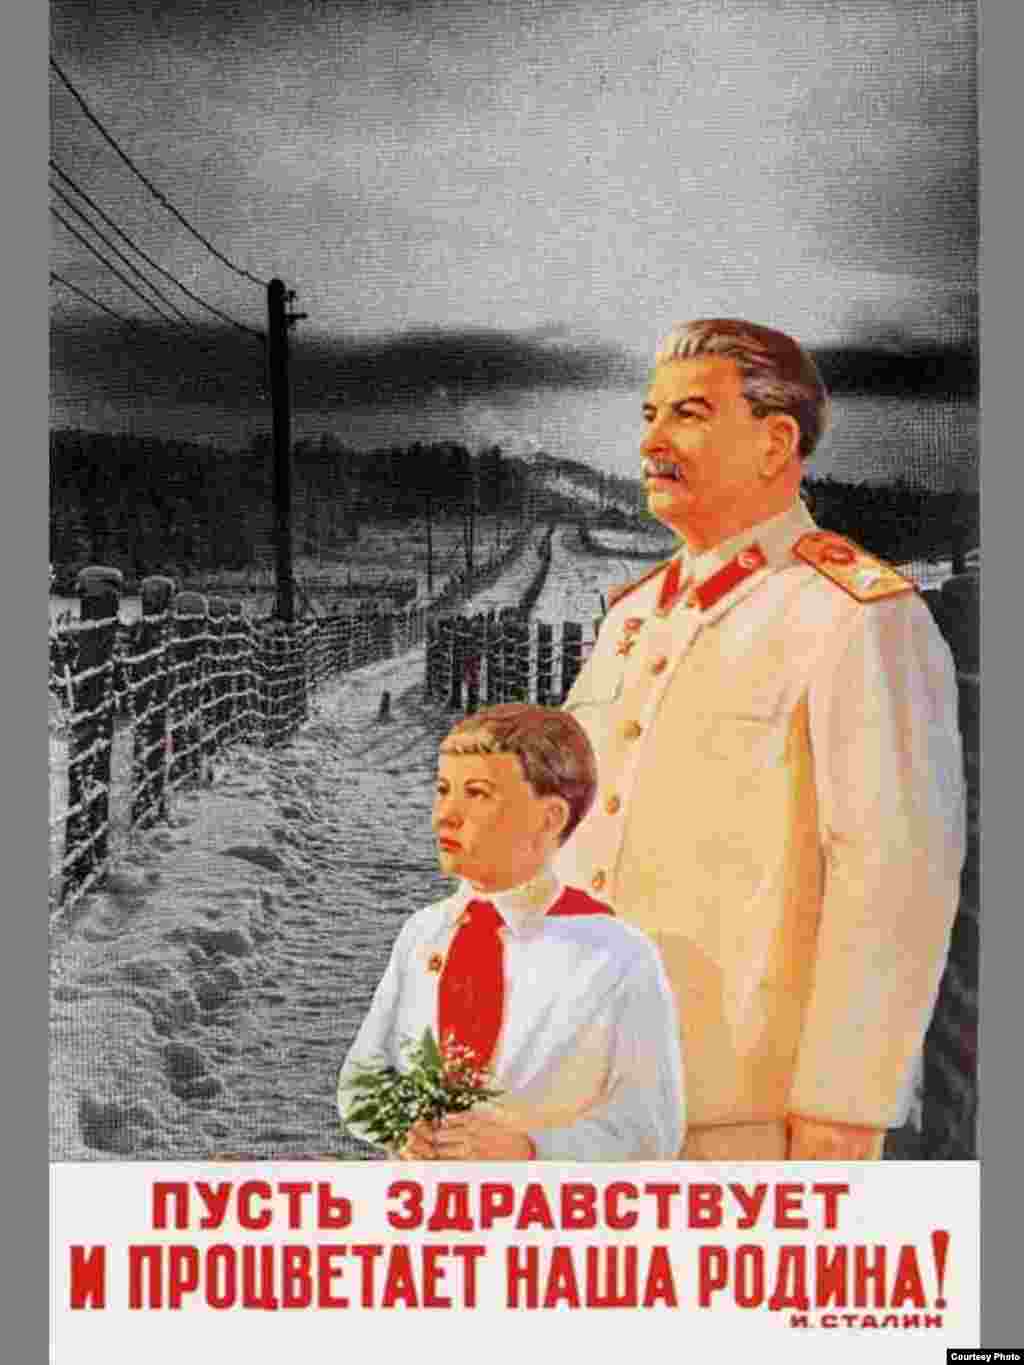 This poster, stating "Let the motherland prosper and bloom," superimposes Stalin and a young supporter on a prison camp. - Before the 65th anniversary in May of the end of World War II in Europe, some Russian leaders encouraged renewed pride in Stalin's role in the defeat of fascism. A bus decorated with Stalin's image toured St. Petersburg, while a plan to display posters of the dictator in Moscow was scuttled only at the last minute. Poster by Valdimir Potapov